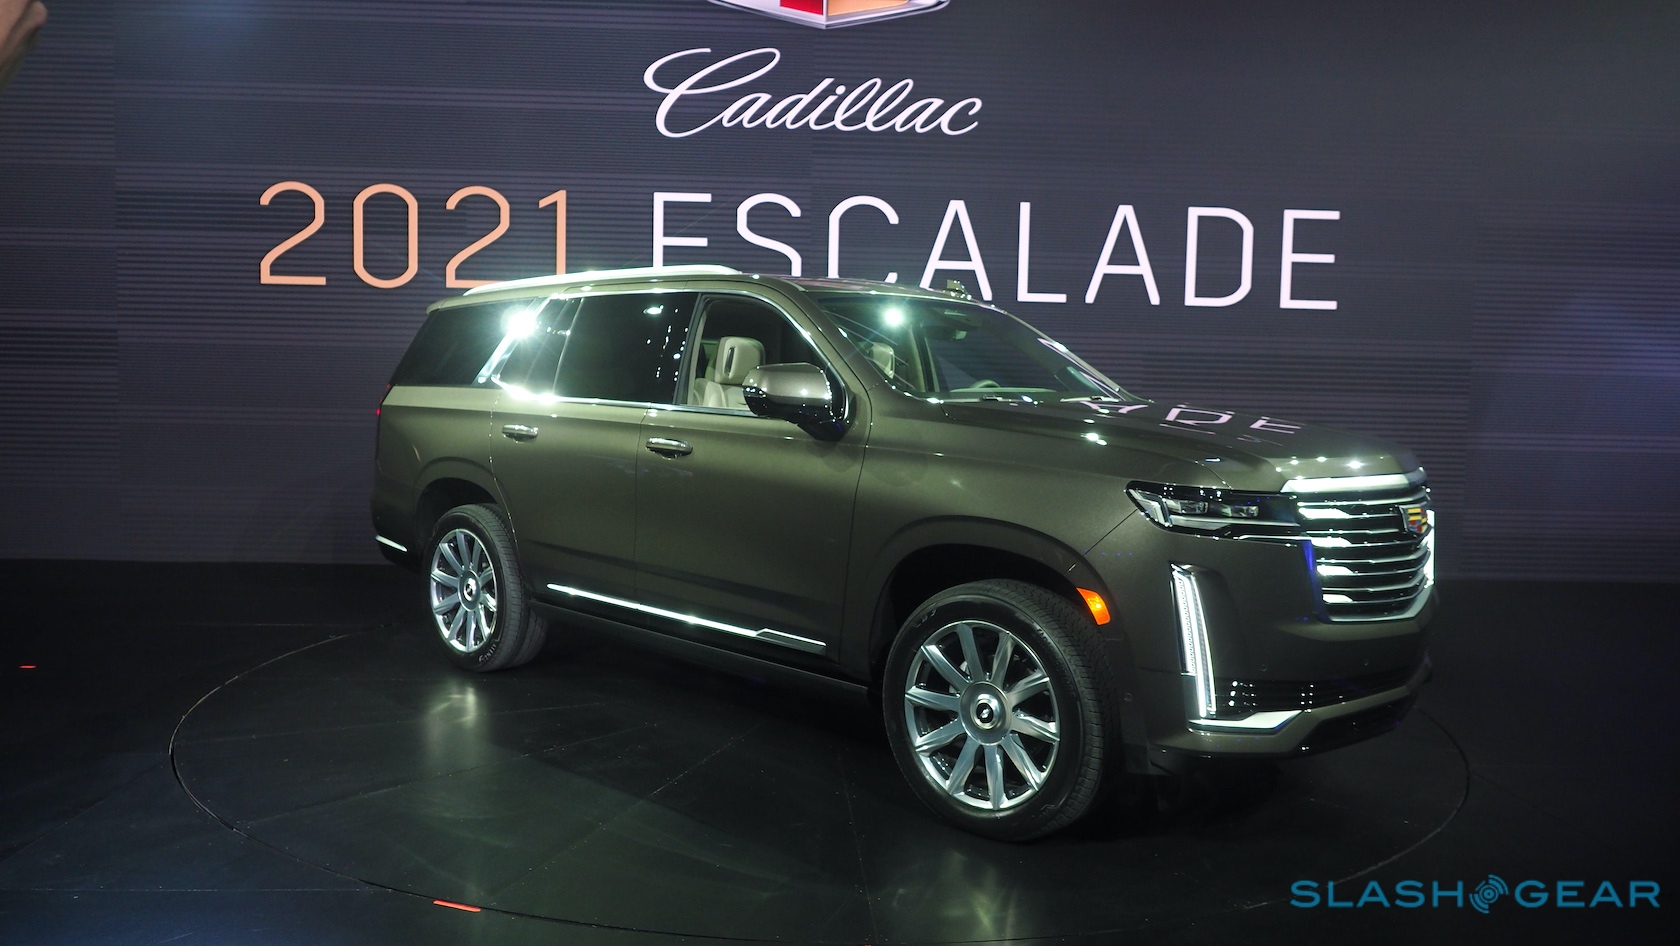 2021 Cadillac Escalade Official Legendary Suv Gets More Space And